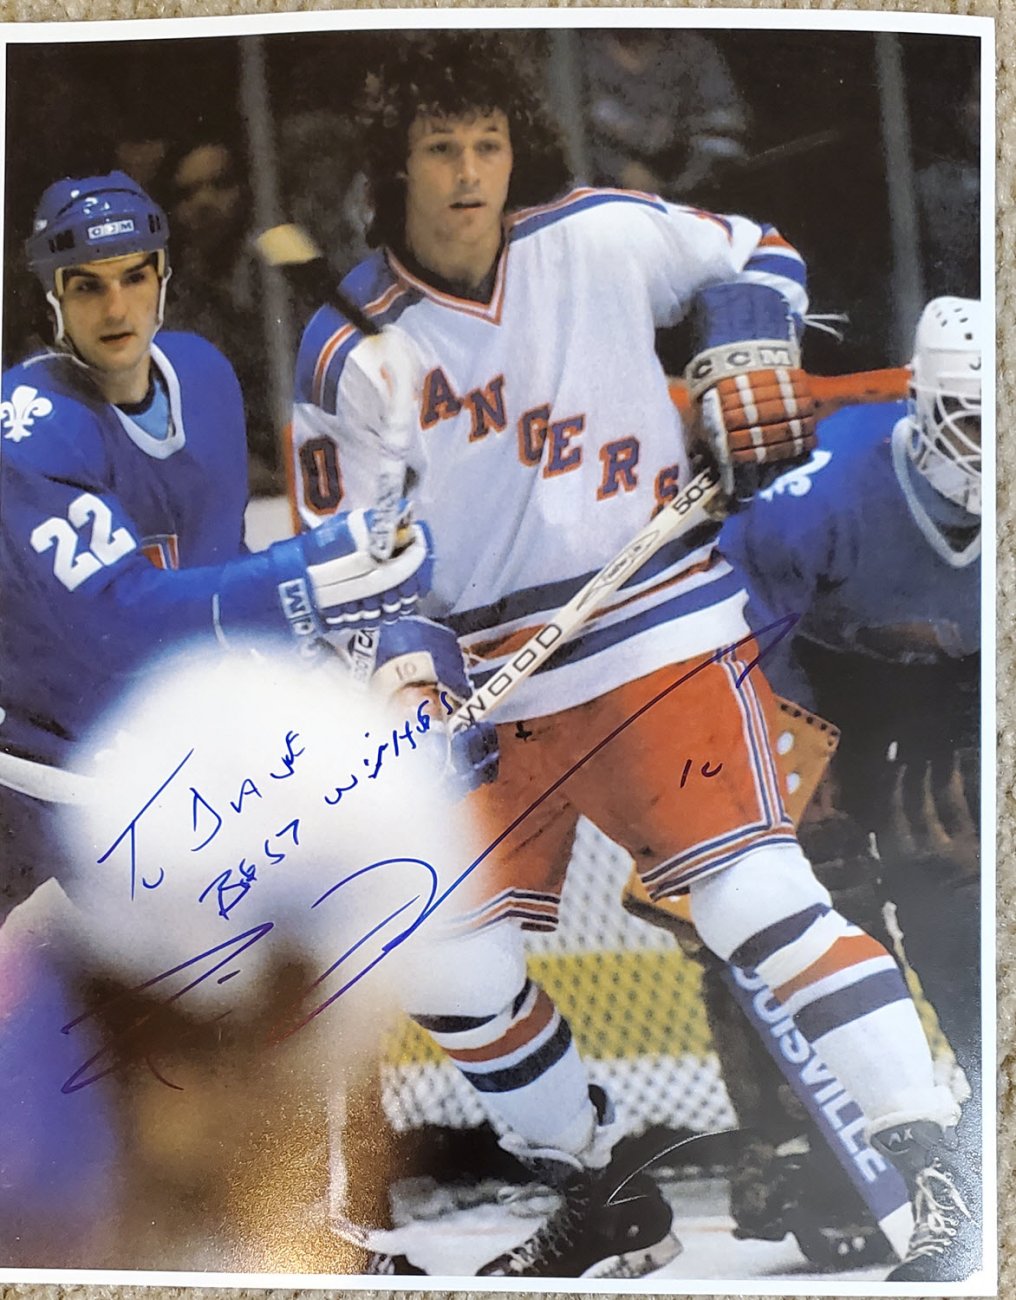 April 6 in New York Rangers history: Ron Duguay ties fastest goal record